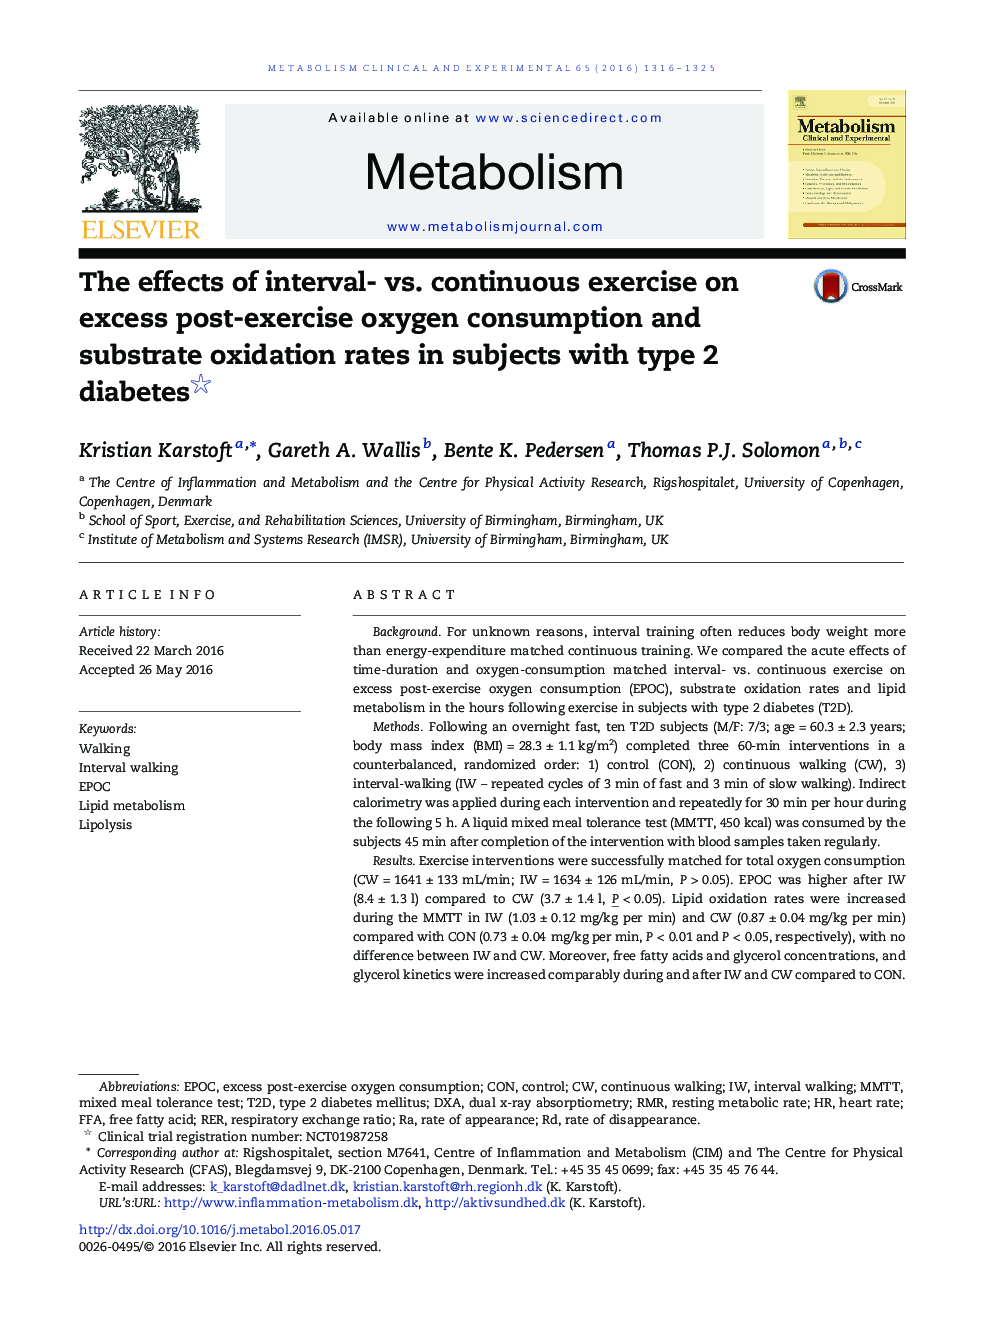 The effects of interval- vs. continuous exercise on excess post-exercise oxygen consumption and substrate oxidation rates in subjects with type 2 diabetes